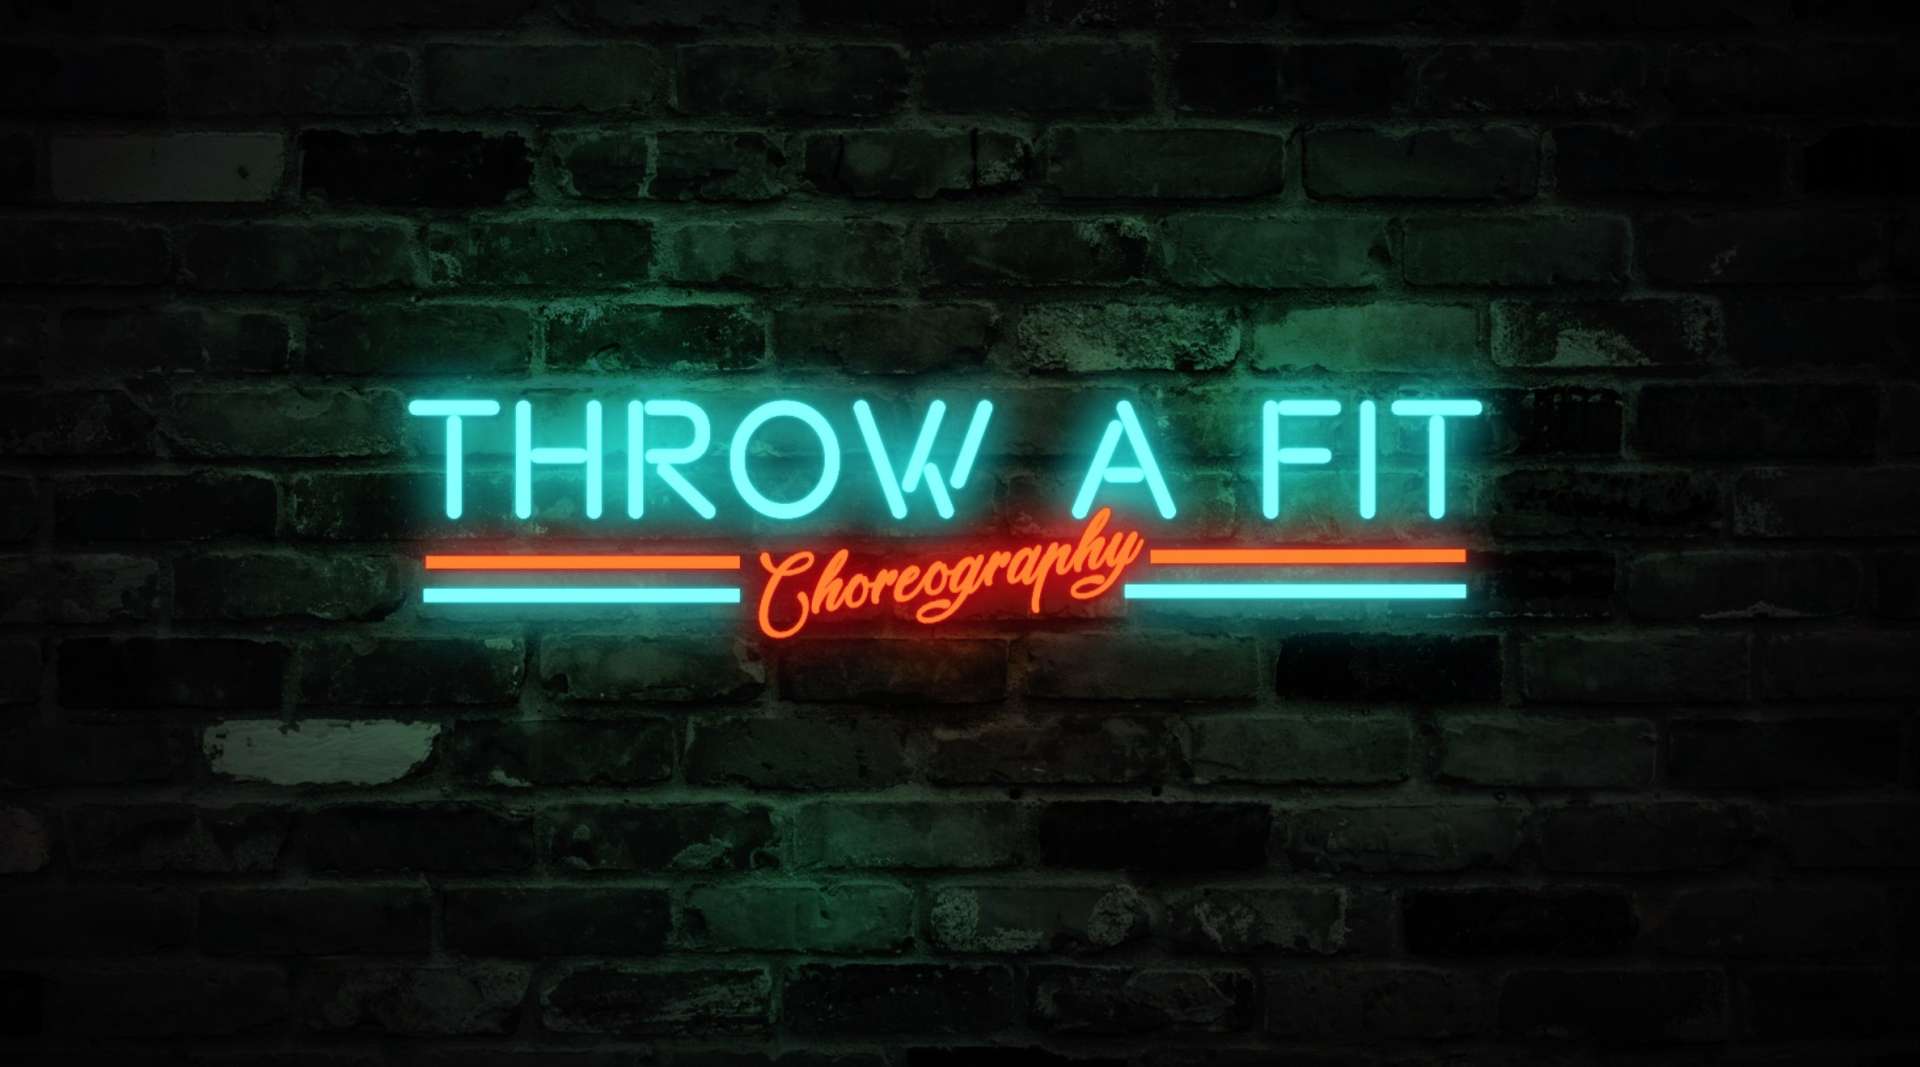 Throw a Fit 舞蹈动画